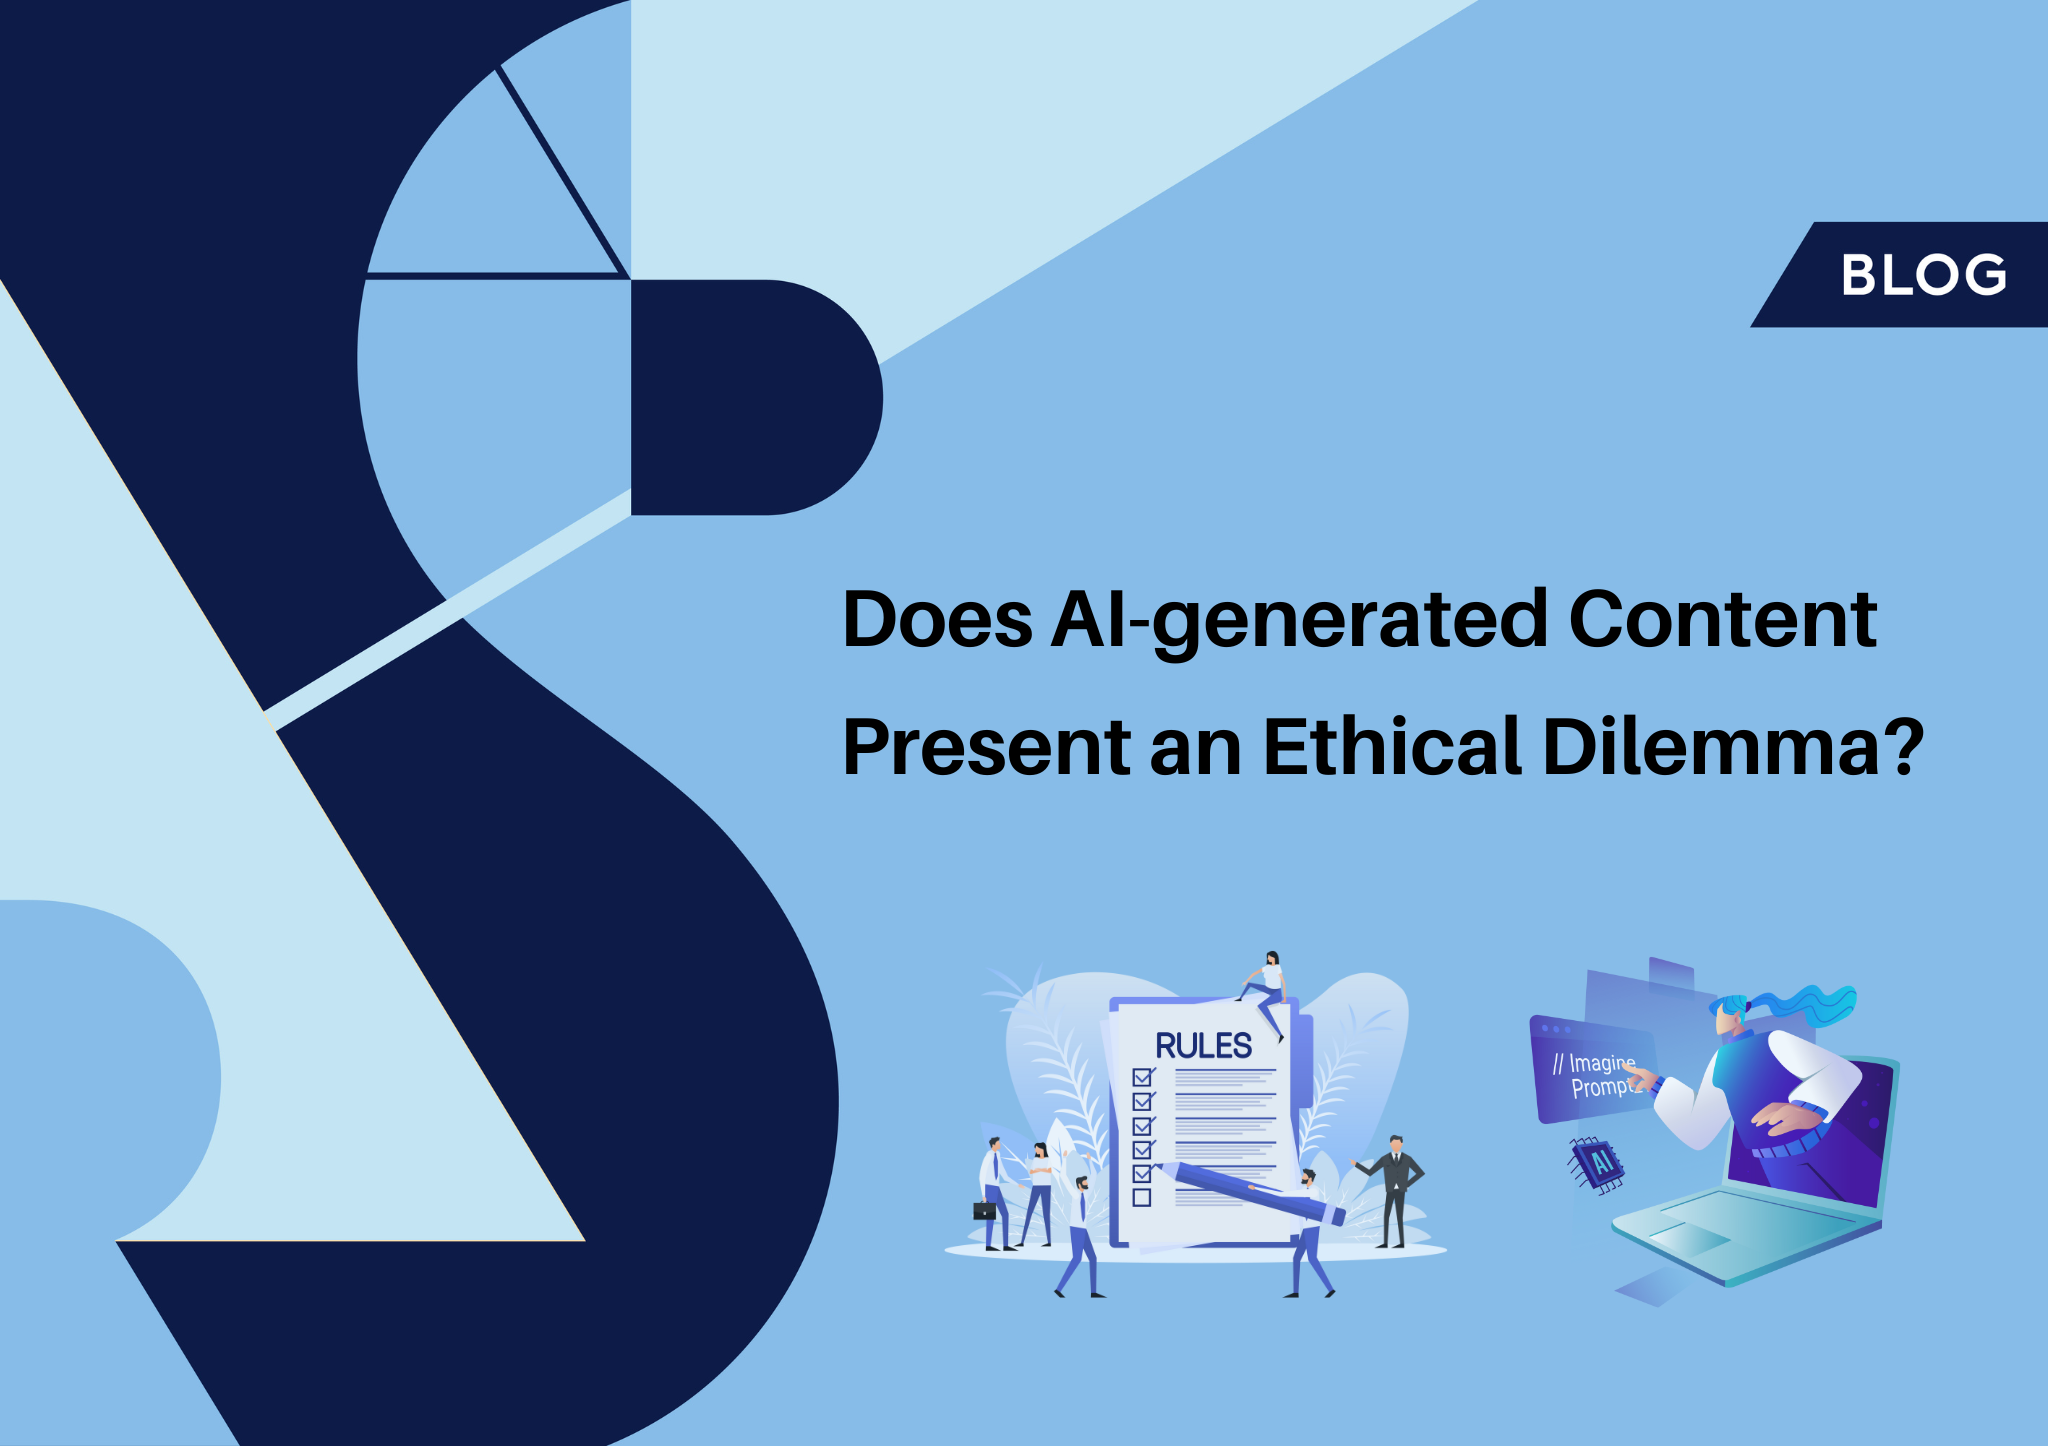 Ethics of AI-generated content